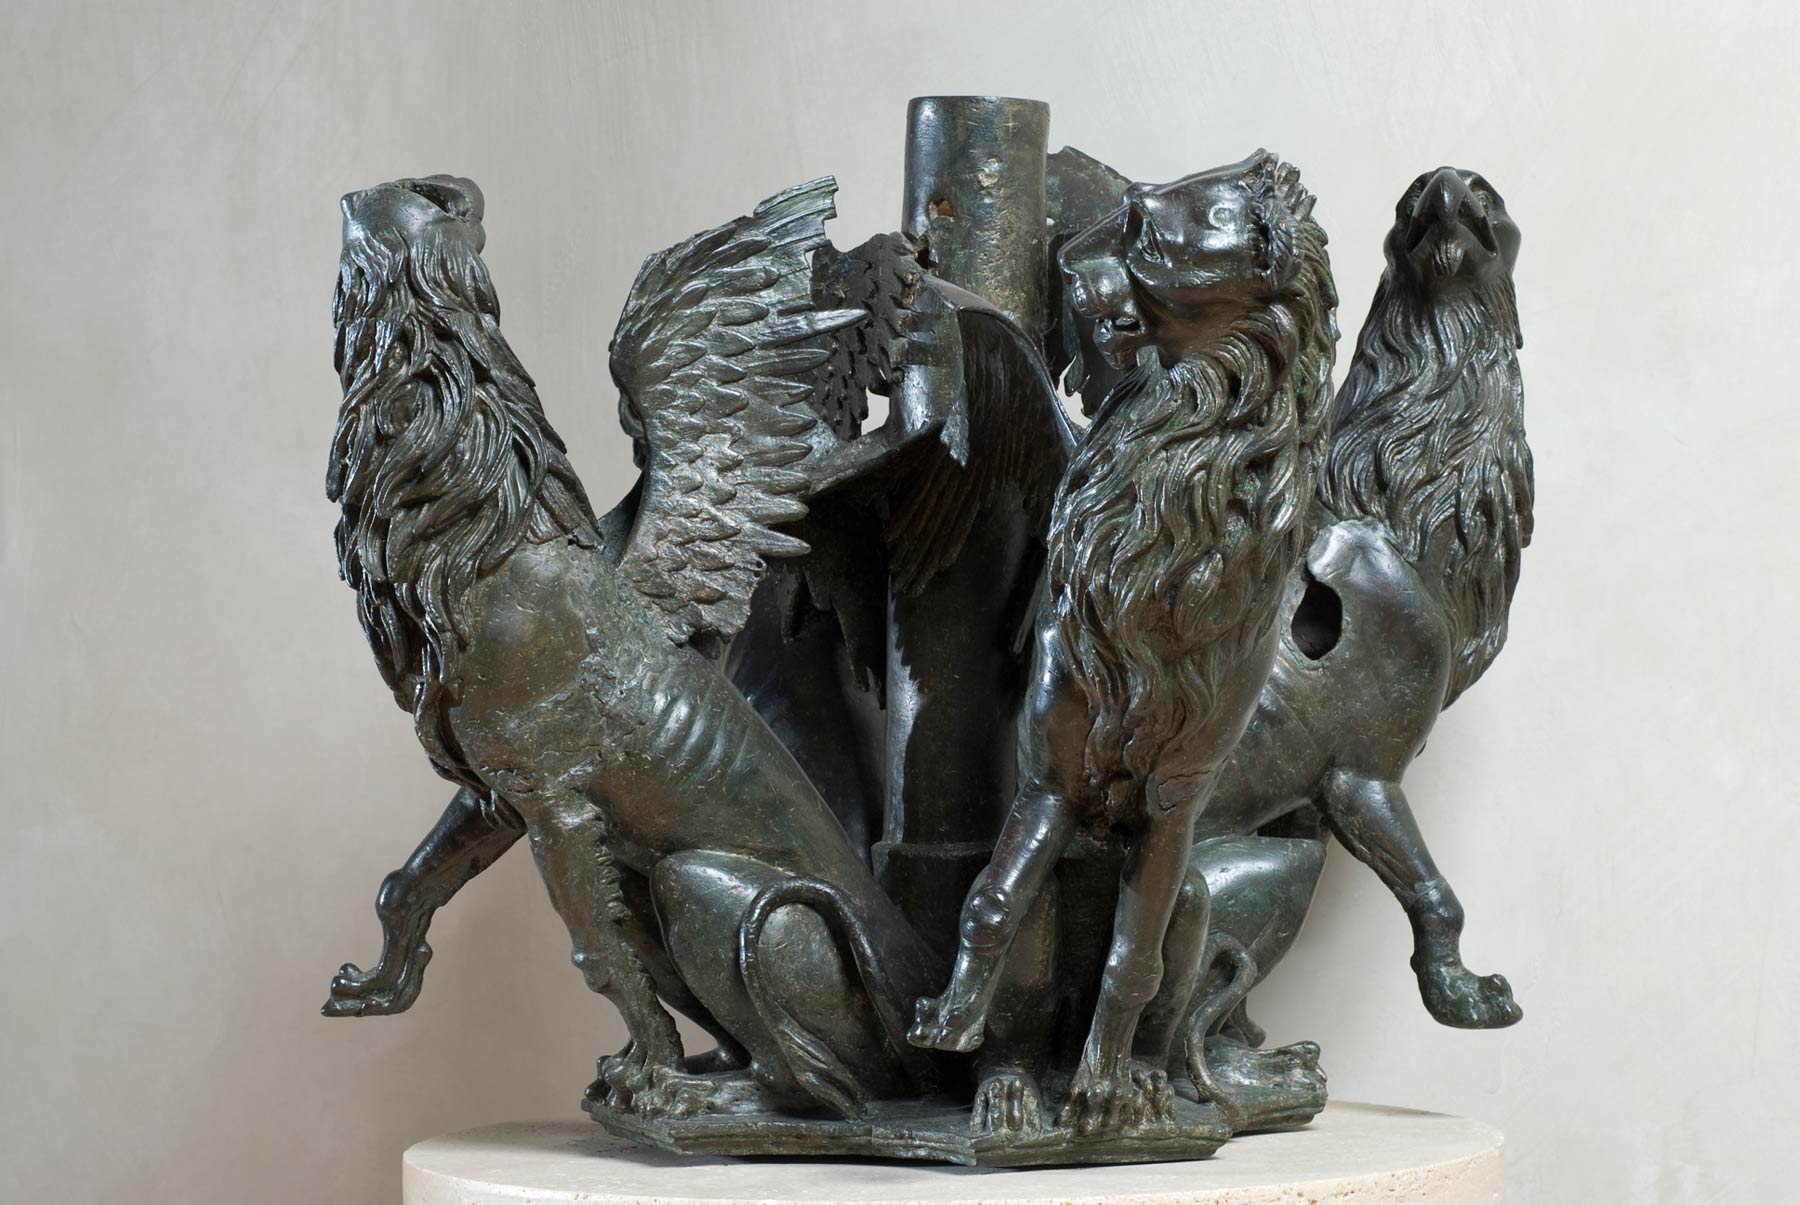 Rubeus, Griffins and Lions (1280-1299; bronze; Perugia, National Gallery of Umbria)